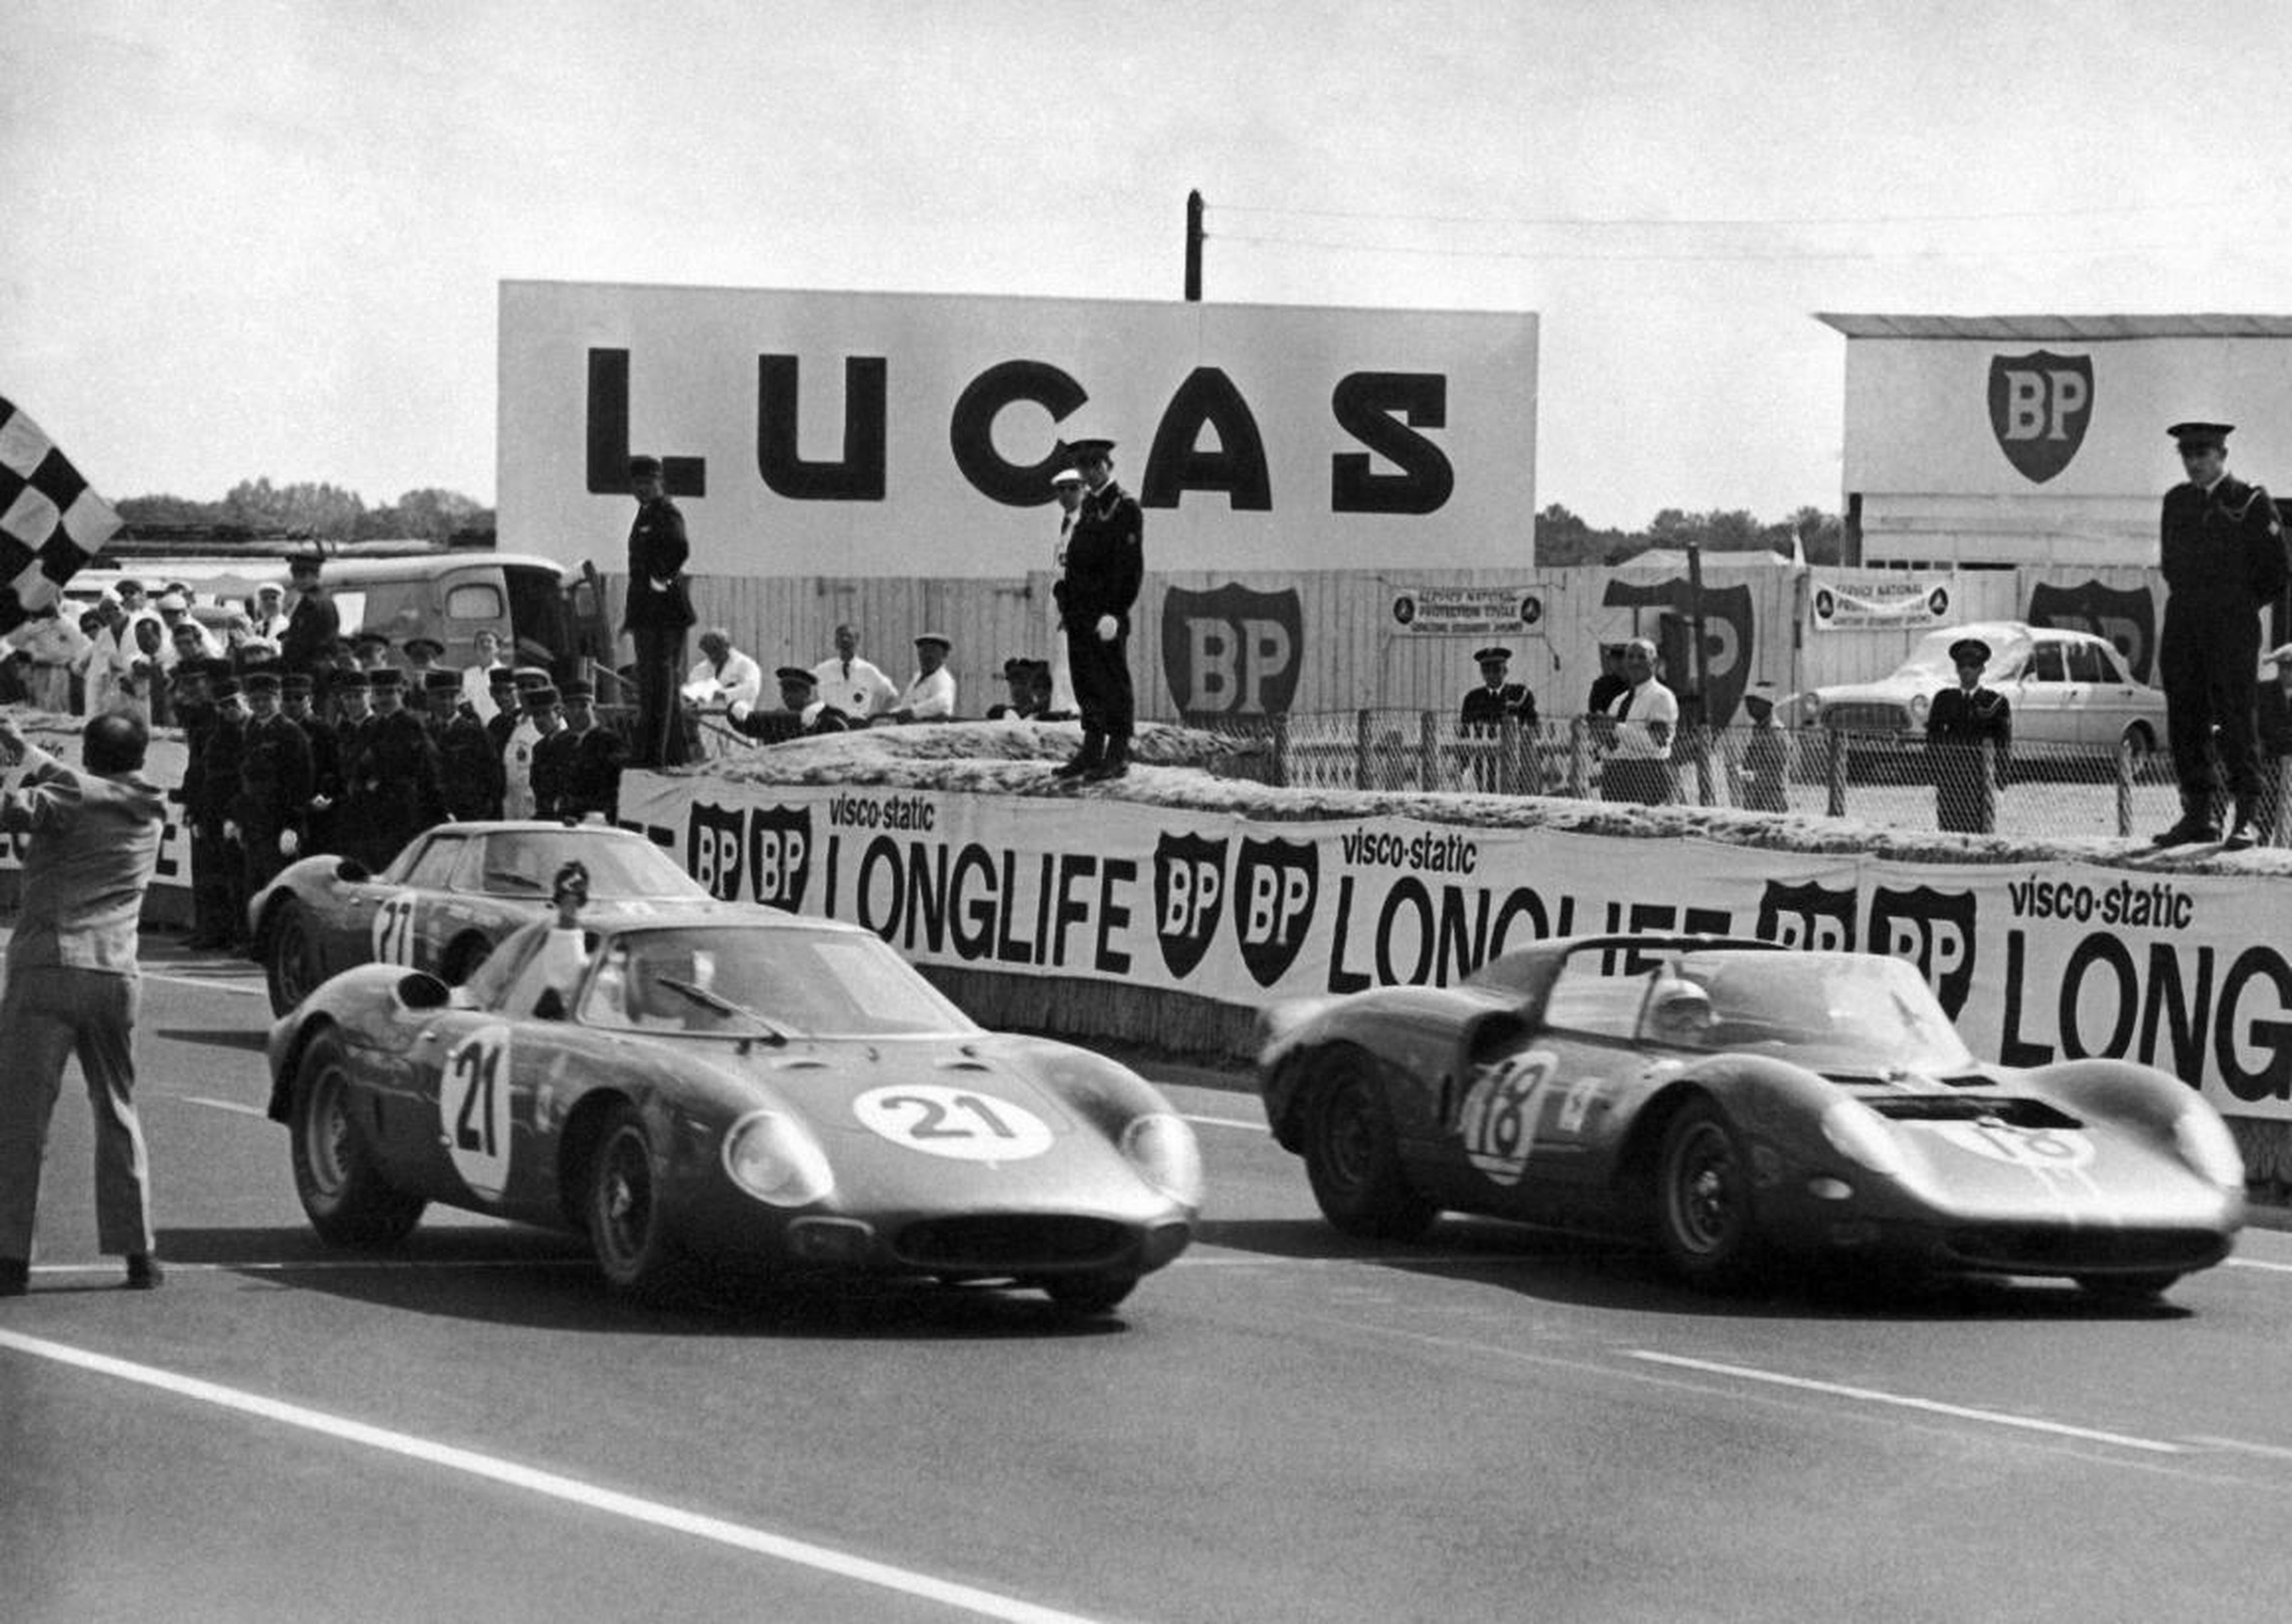 Ferrari ruled Le Mans at the time. Enzo and his team had dominated the grueling 24 hour-long endurance sports-car race — winning six times in a row from 1960-1965.